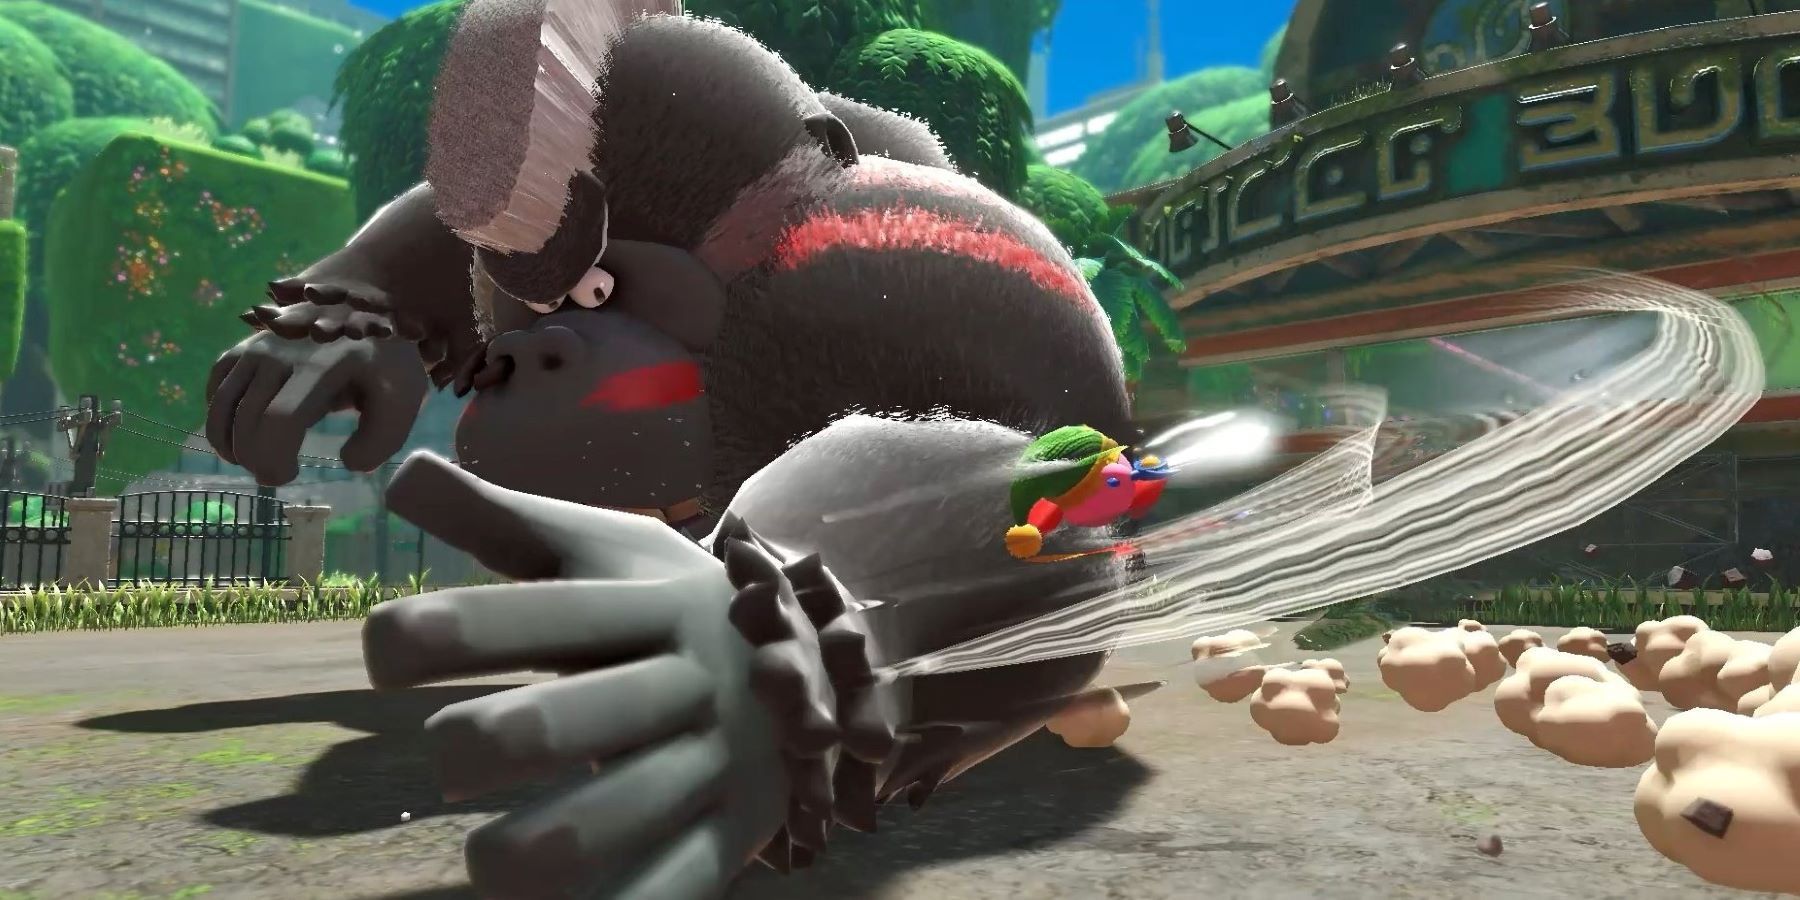 Sword Kirby fighting the gorilla boss in Kirby and the Forgotten Land